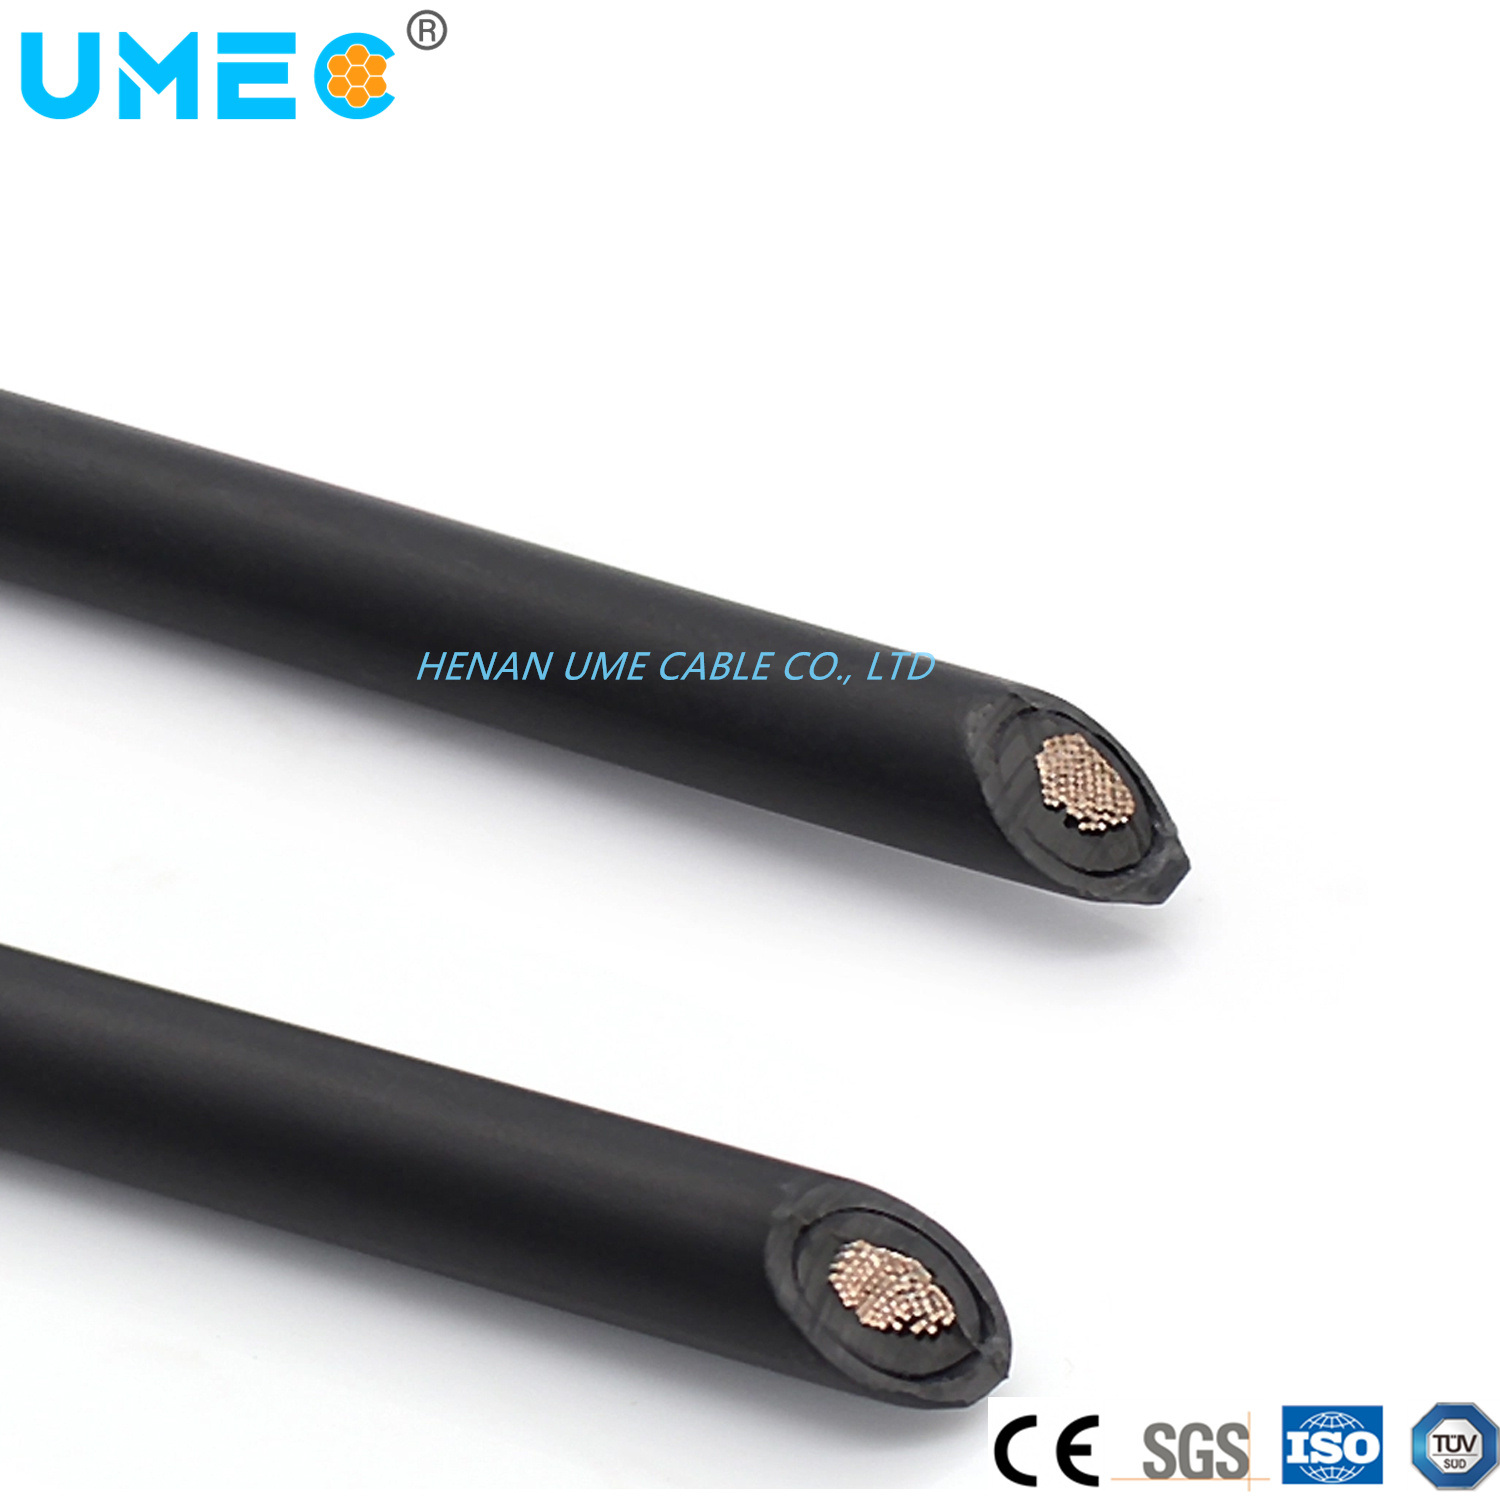 IEC Approval Single Twin Core 2.5mm2 4mm2 6mm2 10mm2 10AWG 12 AWG 14AWG Xlpo PV1-F DC Solar Cable PV Wire